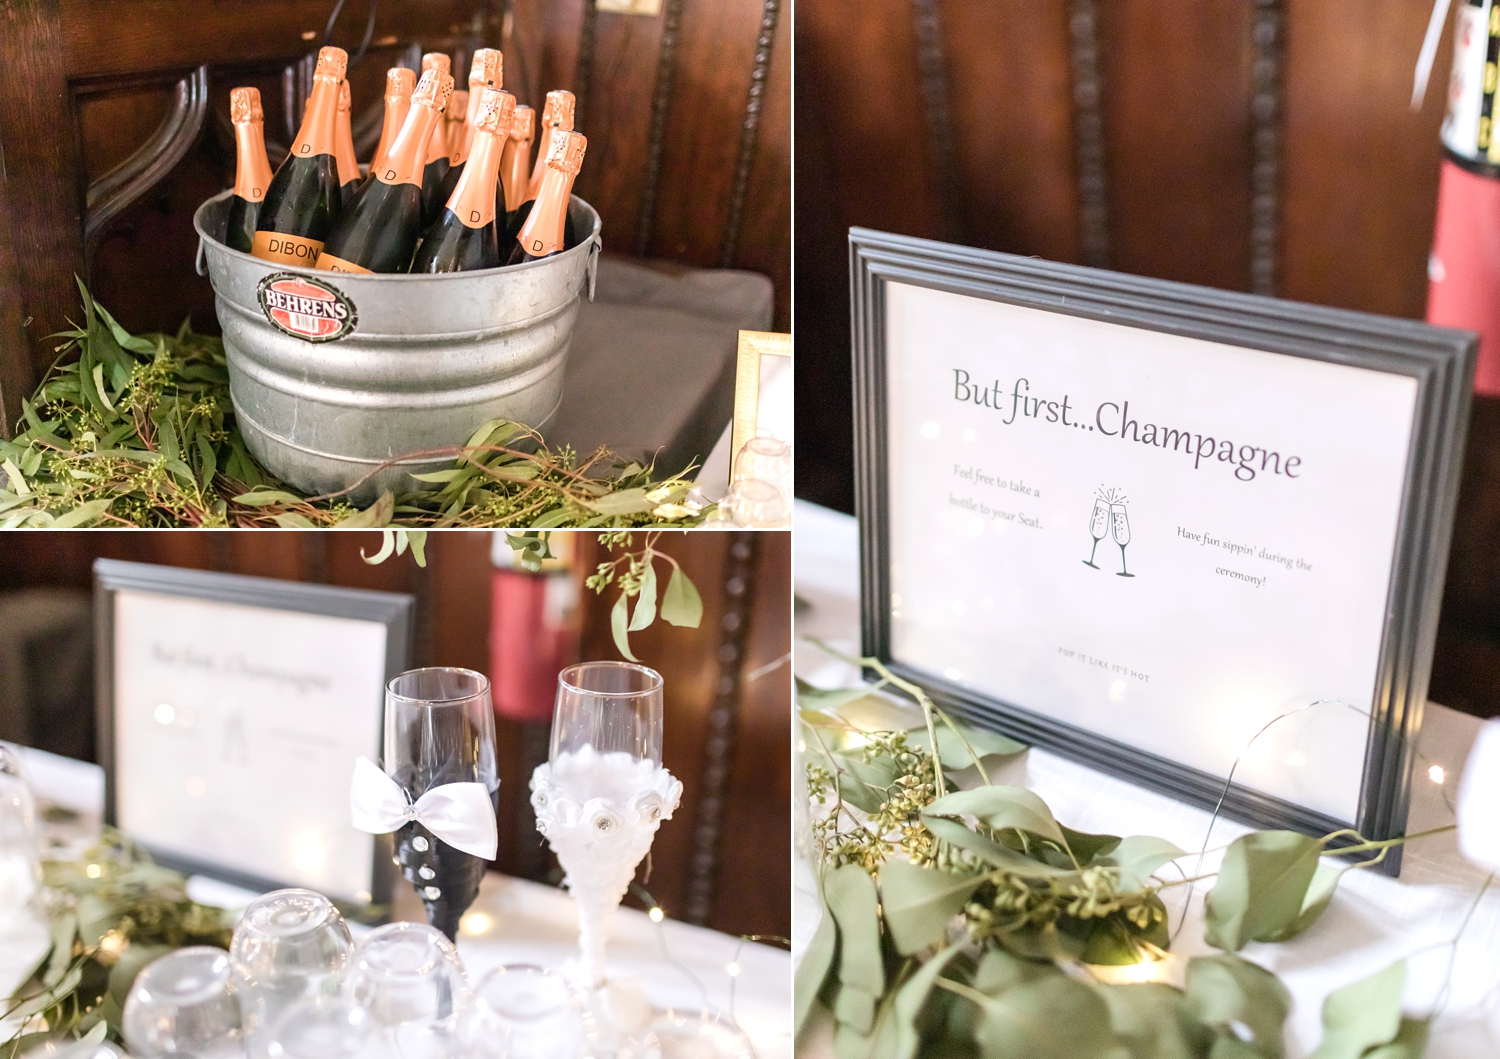  A delicious champagne bar before the ceremony!  